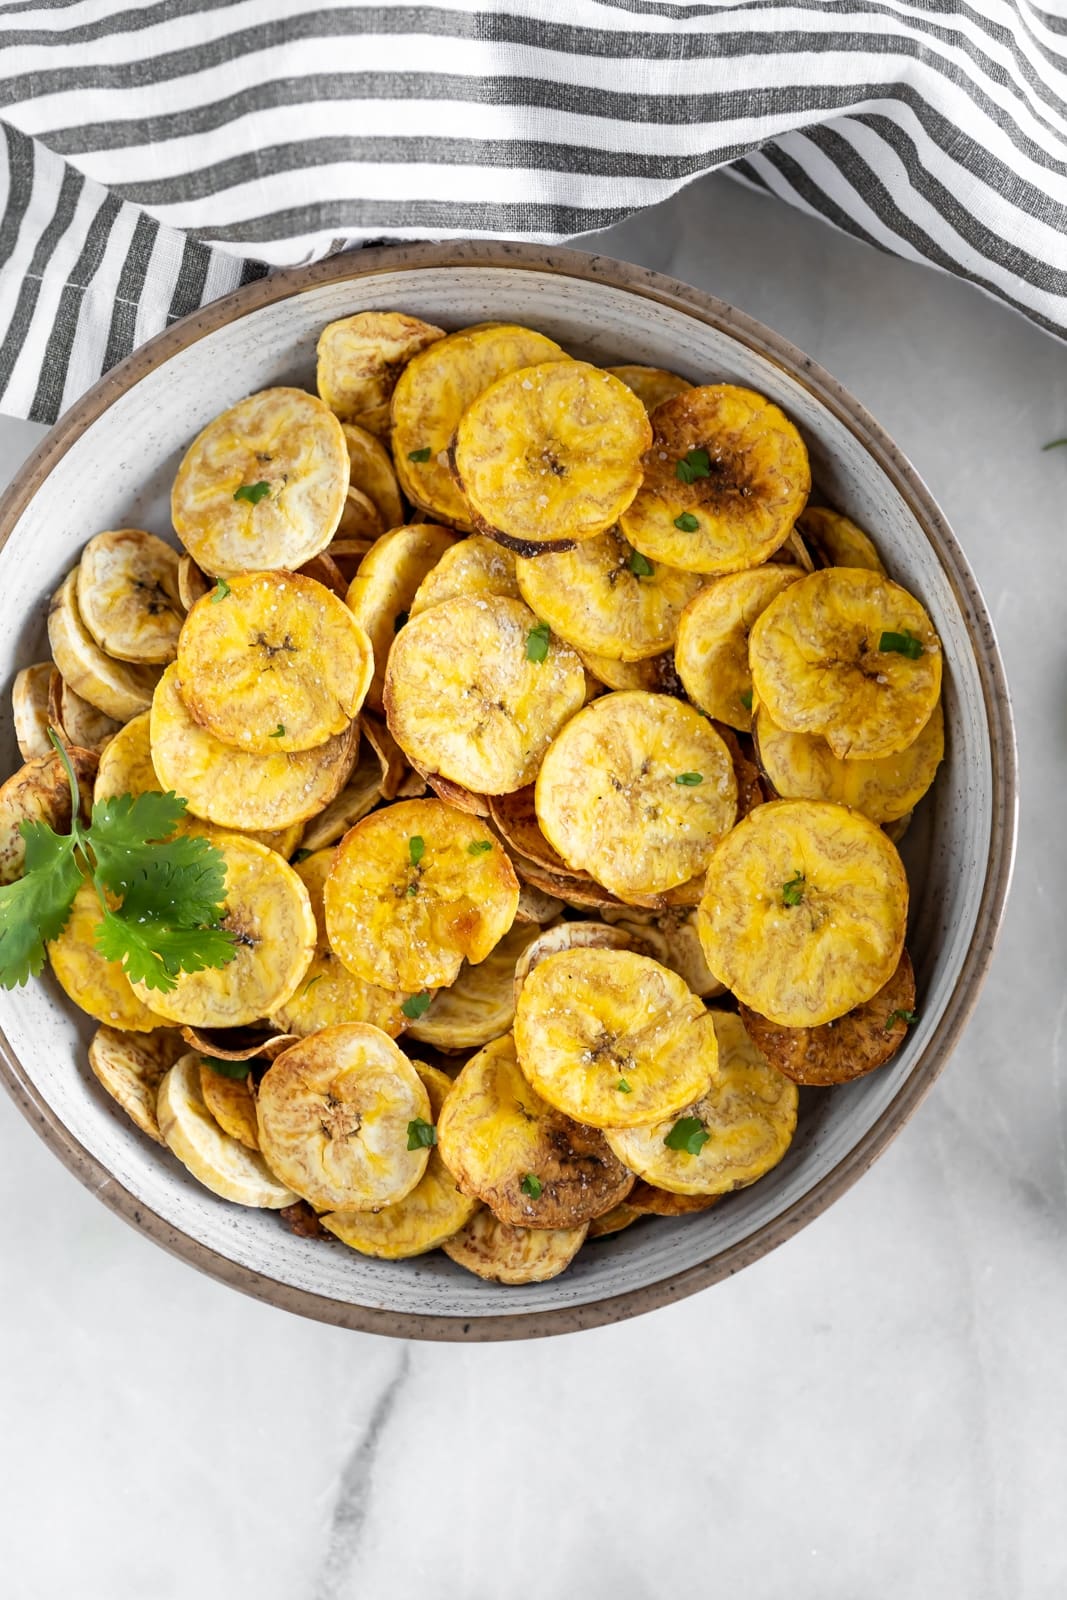 Crispy, salty, baked plantain chips with a vegan garlic dip. The perfect paleo, dairy-free, vegan snack made with just 5-ingredients!